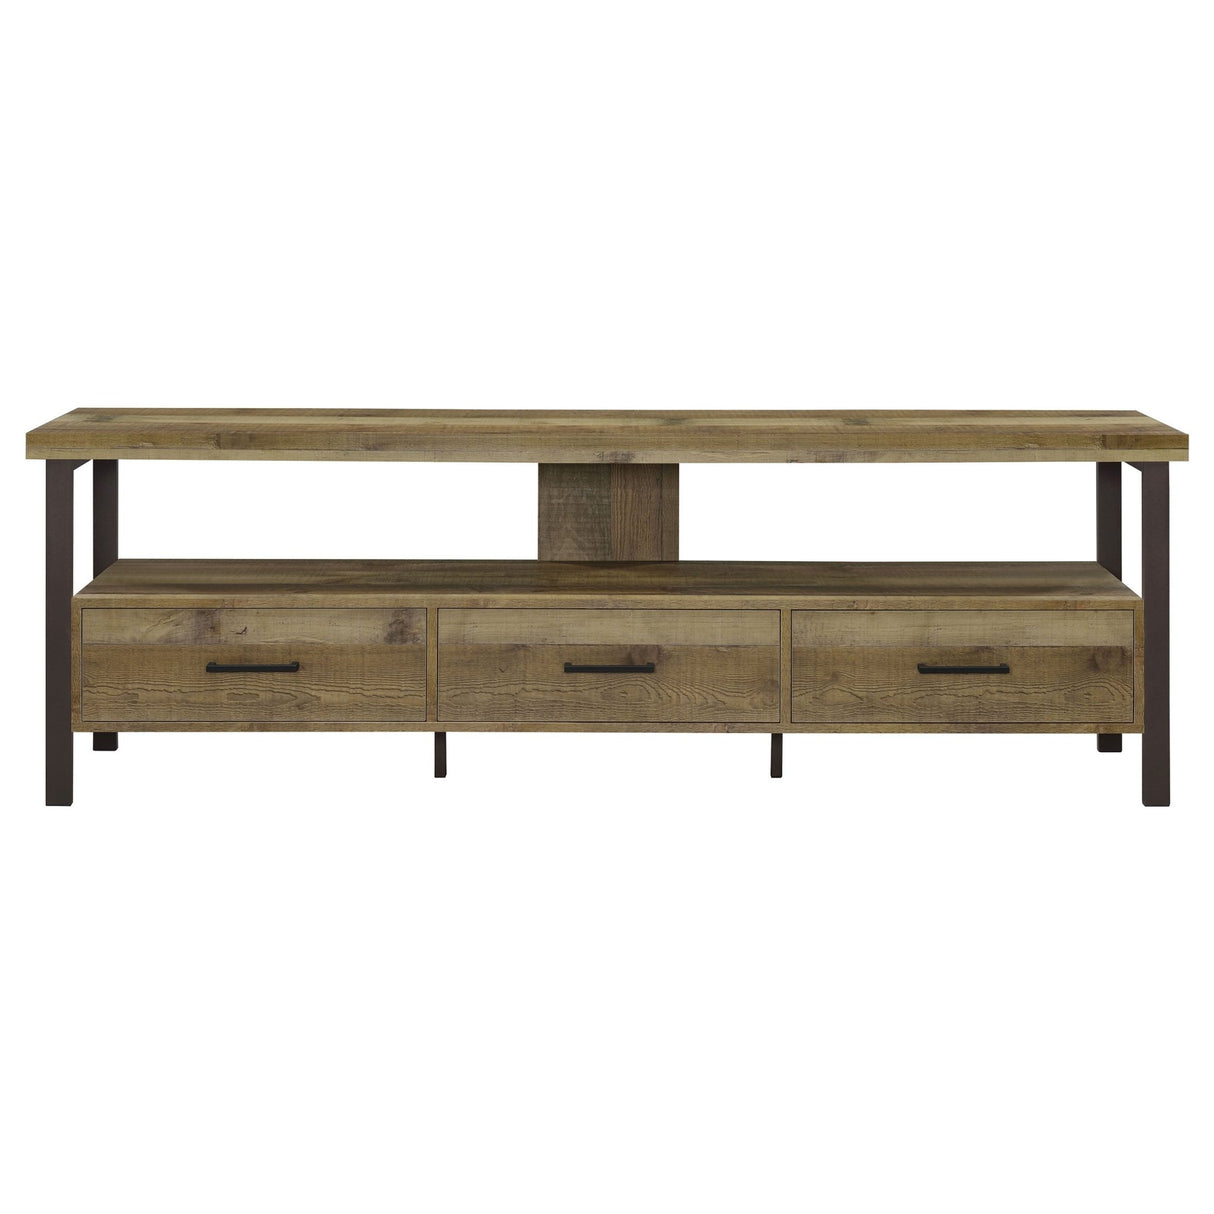 71" Tv Stand - Ruston 71" 3-drawer TV Console Weathered Pine